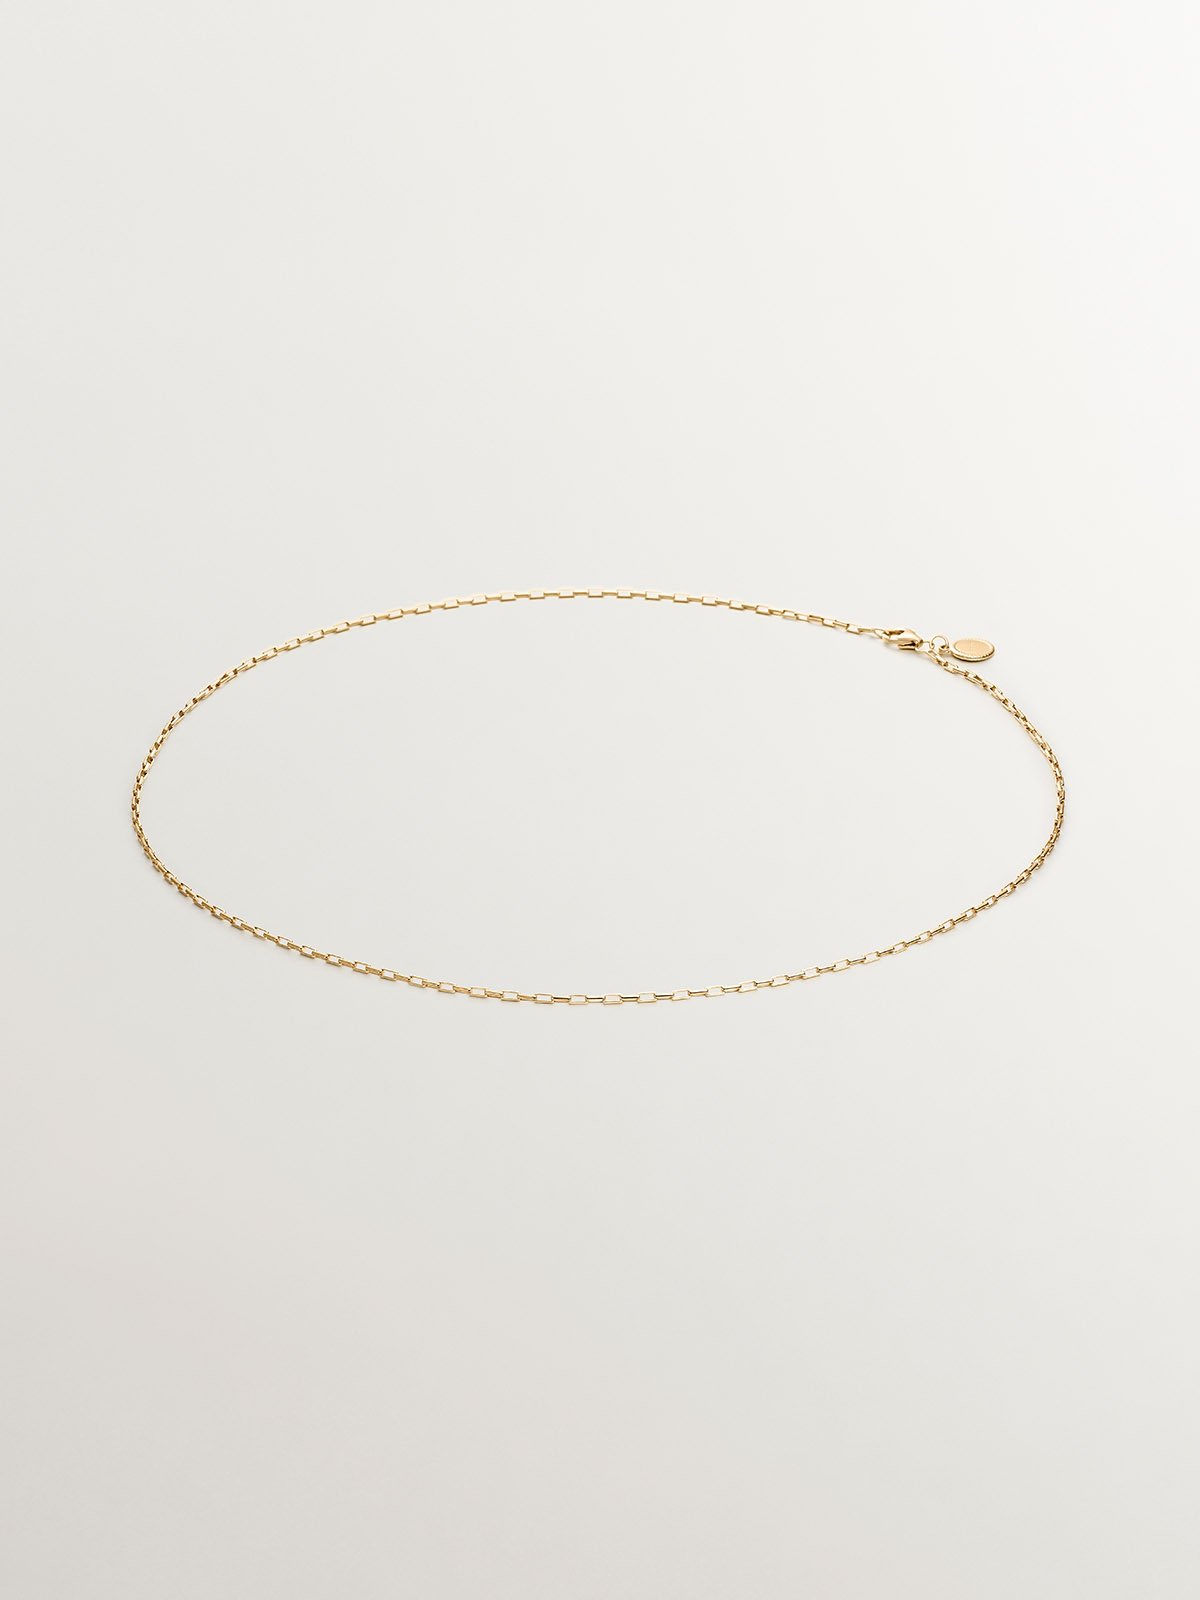 925 Silver chain bathed in 18K yellow gold with rectangular links.